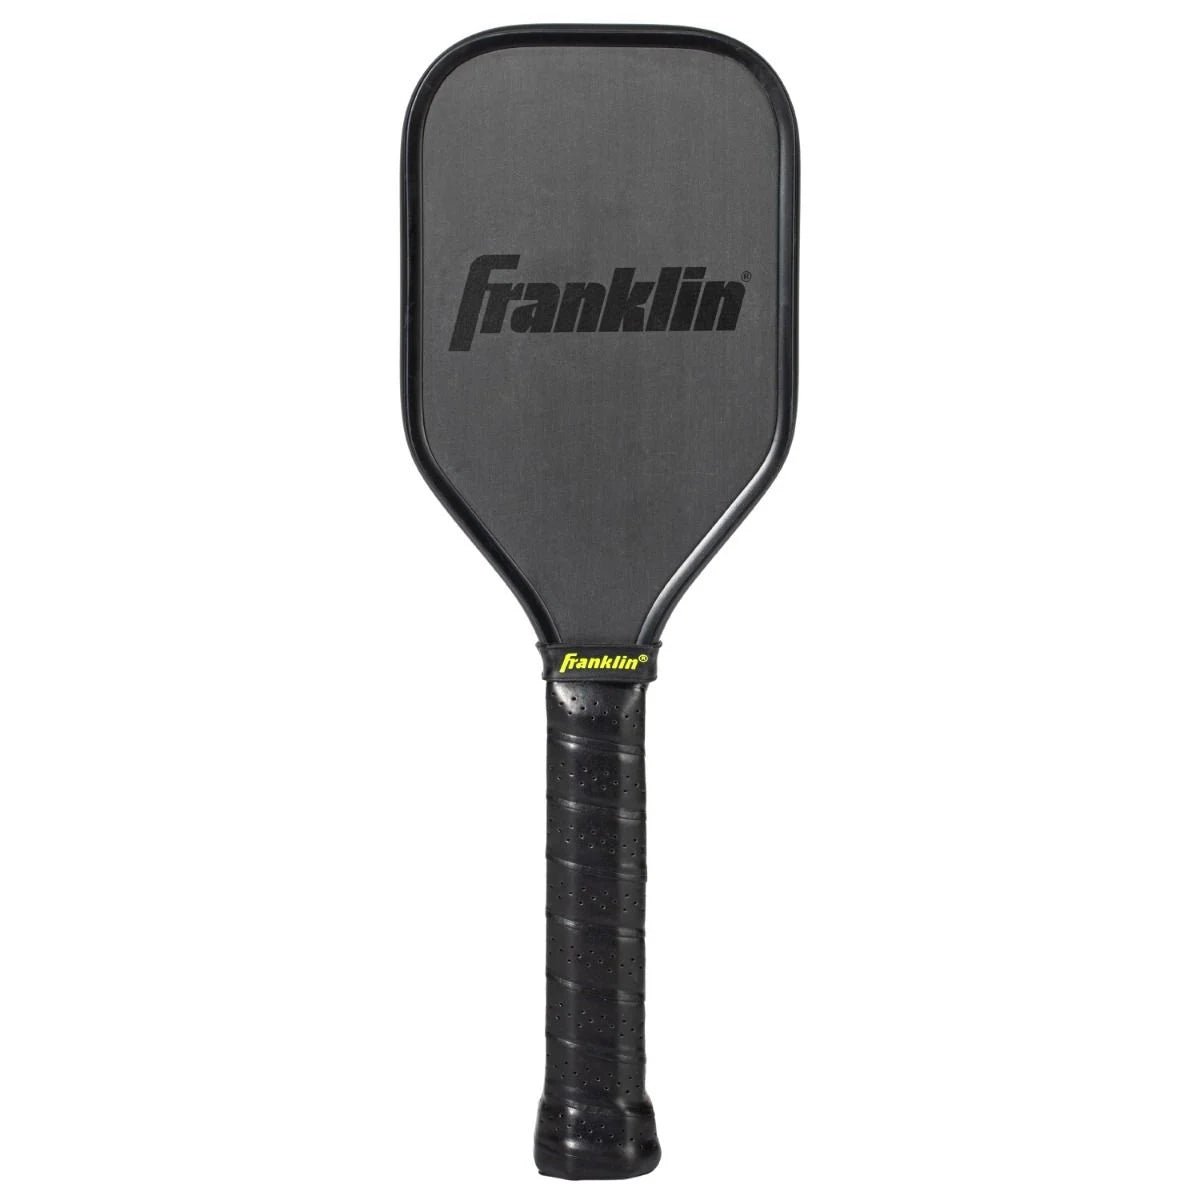 A Franklin Sweet Spot Training Pickleball Paddle with the word Franklin on it.